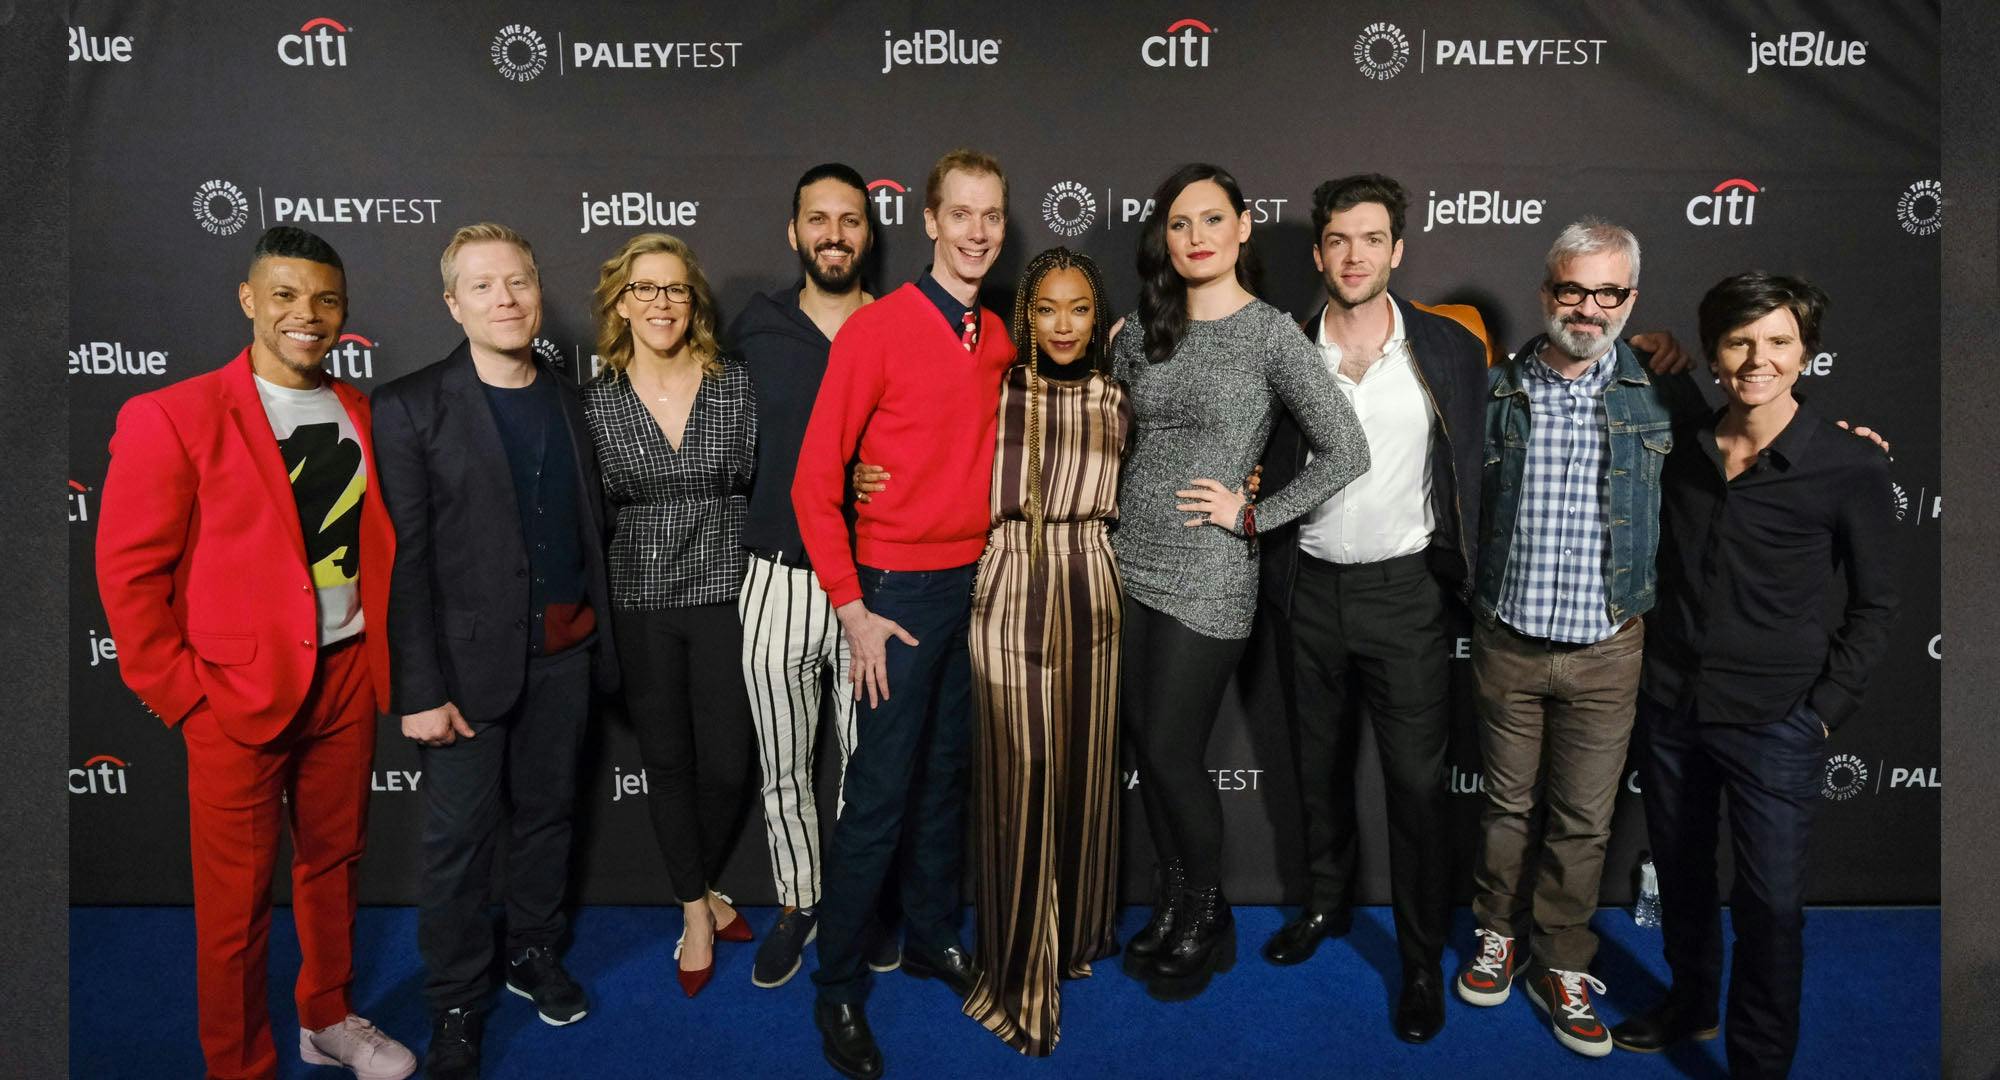 Discovery Cast at PaleyFest